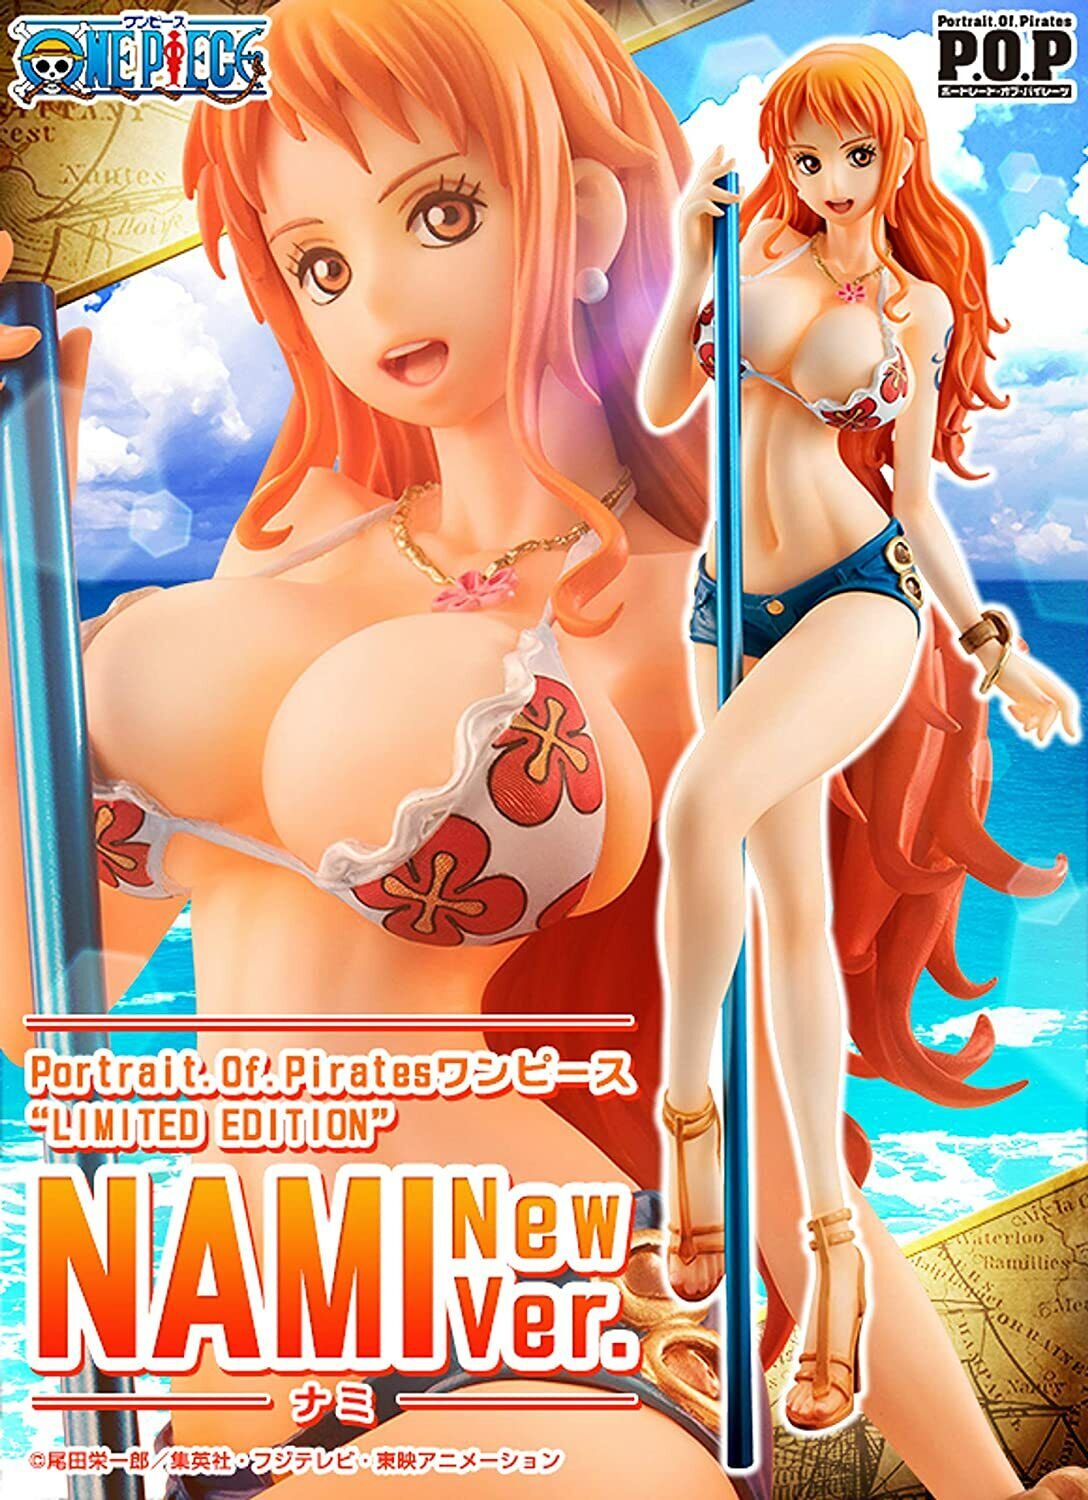 MegaHouse Portrait.Of.Pirates ONE PIECE LIMITED EDITION NAMI NewVer. Figure